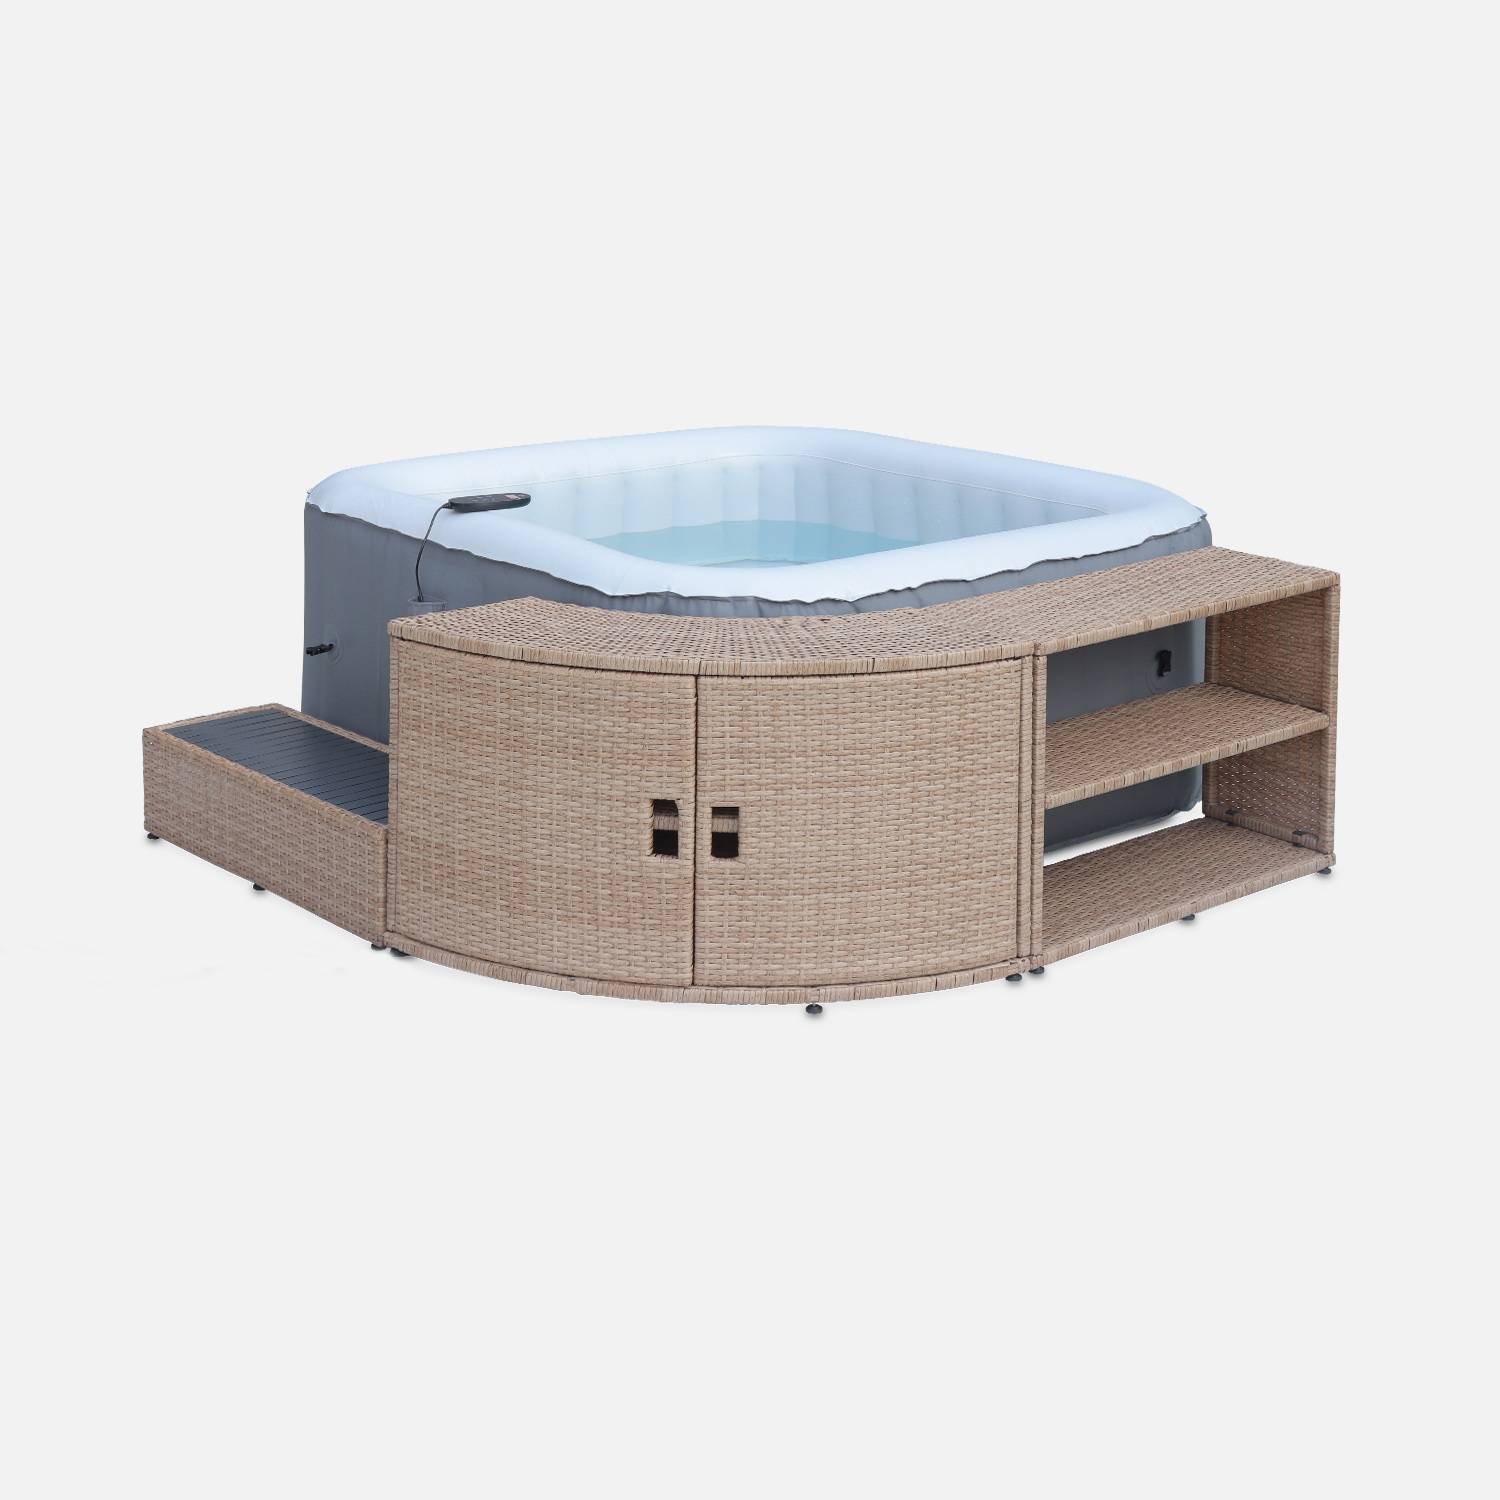 Natural polyrattan surround for square hot tub with cabinet, shelf and footstep Photo3